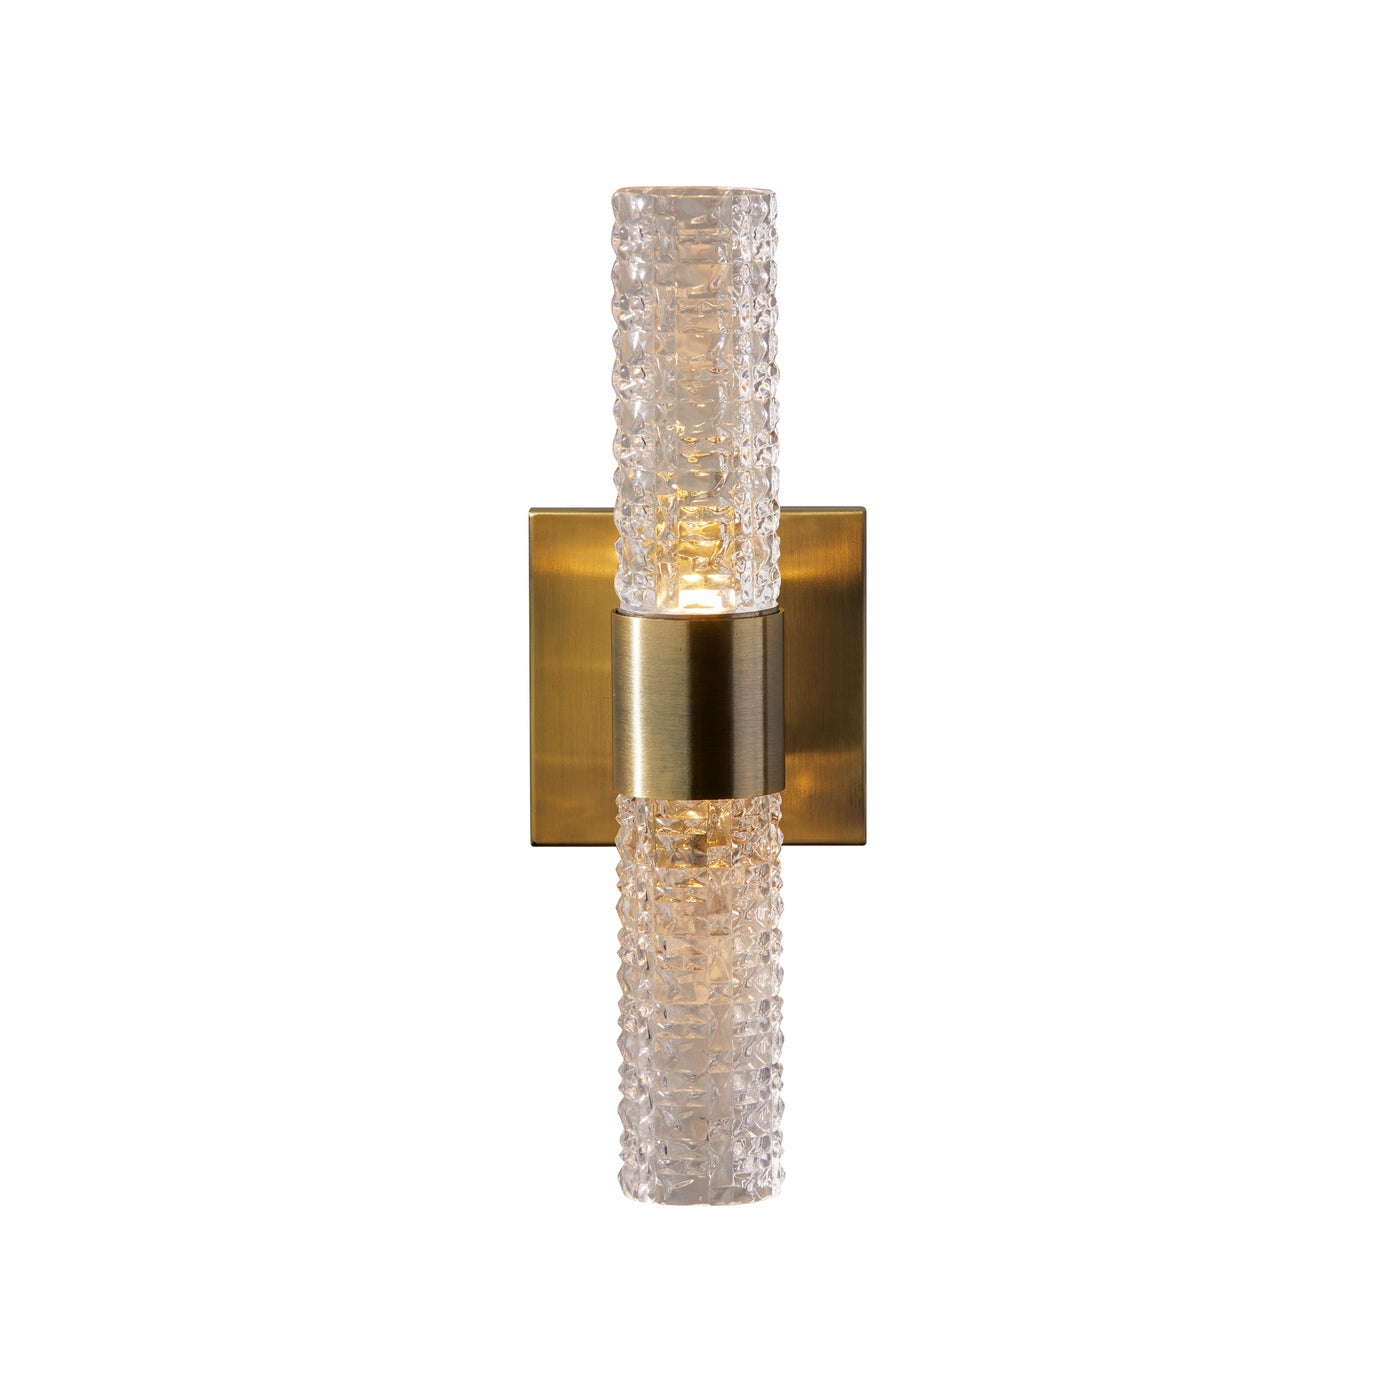 Adesso Home - 3696-21 - LED Wall Lamp - Harriet - Antique Brass